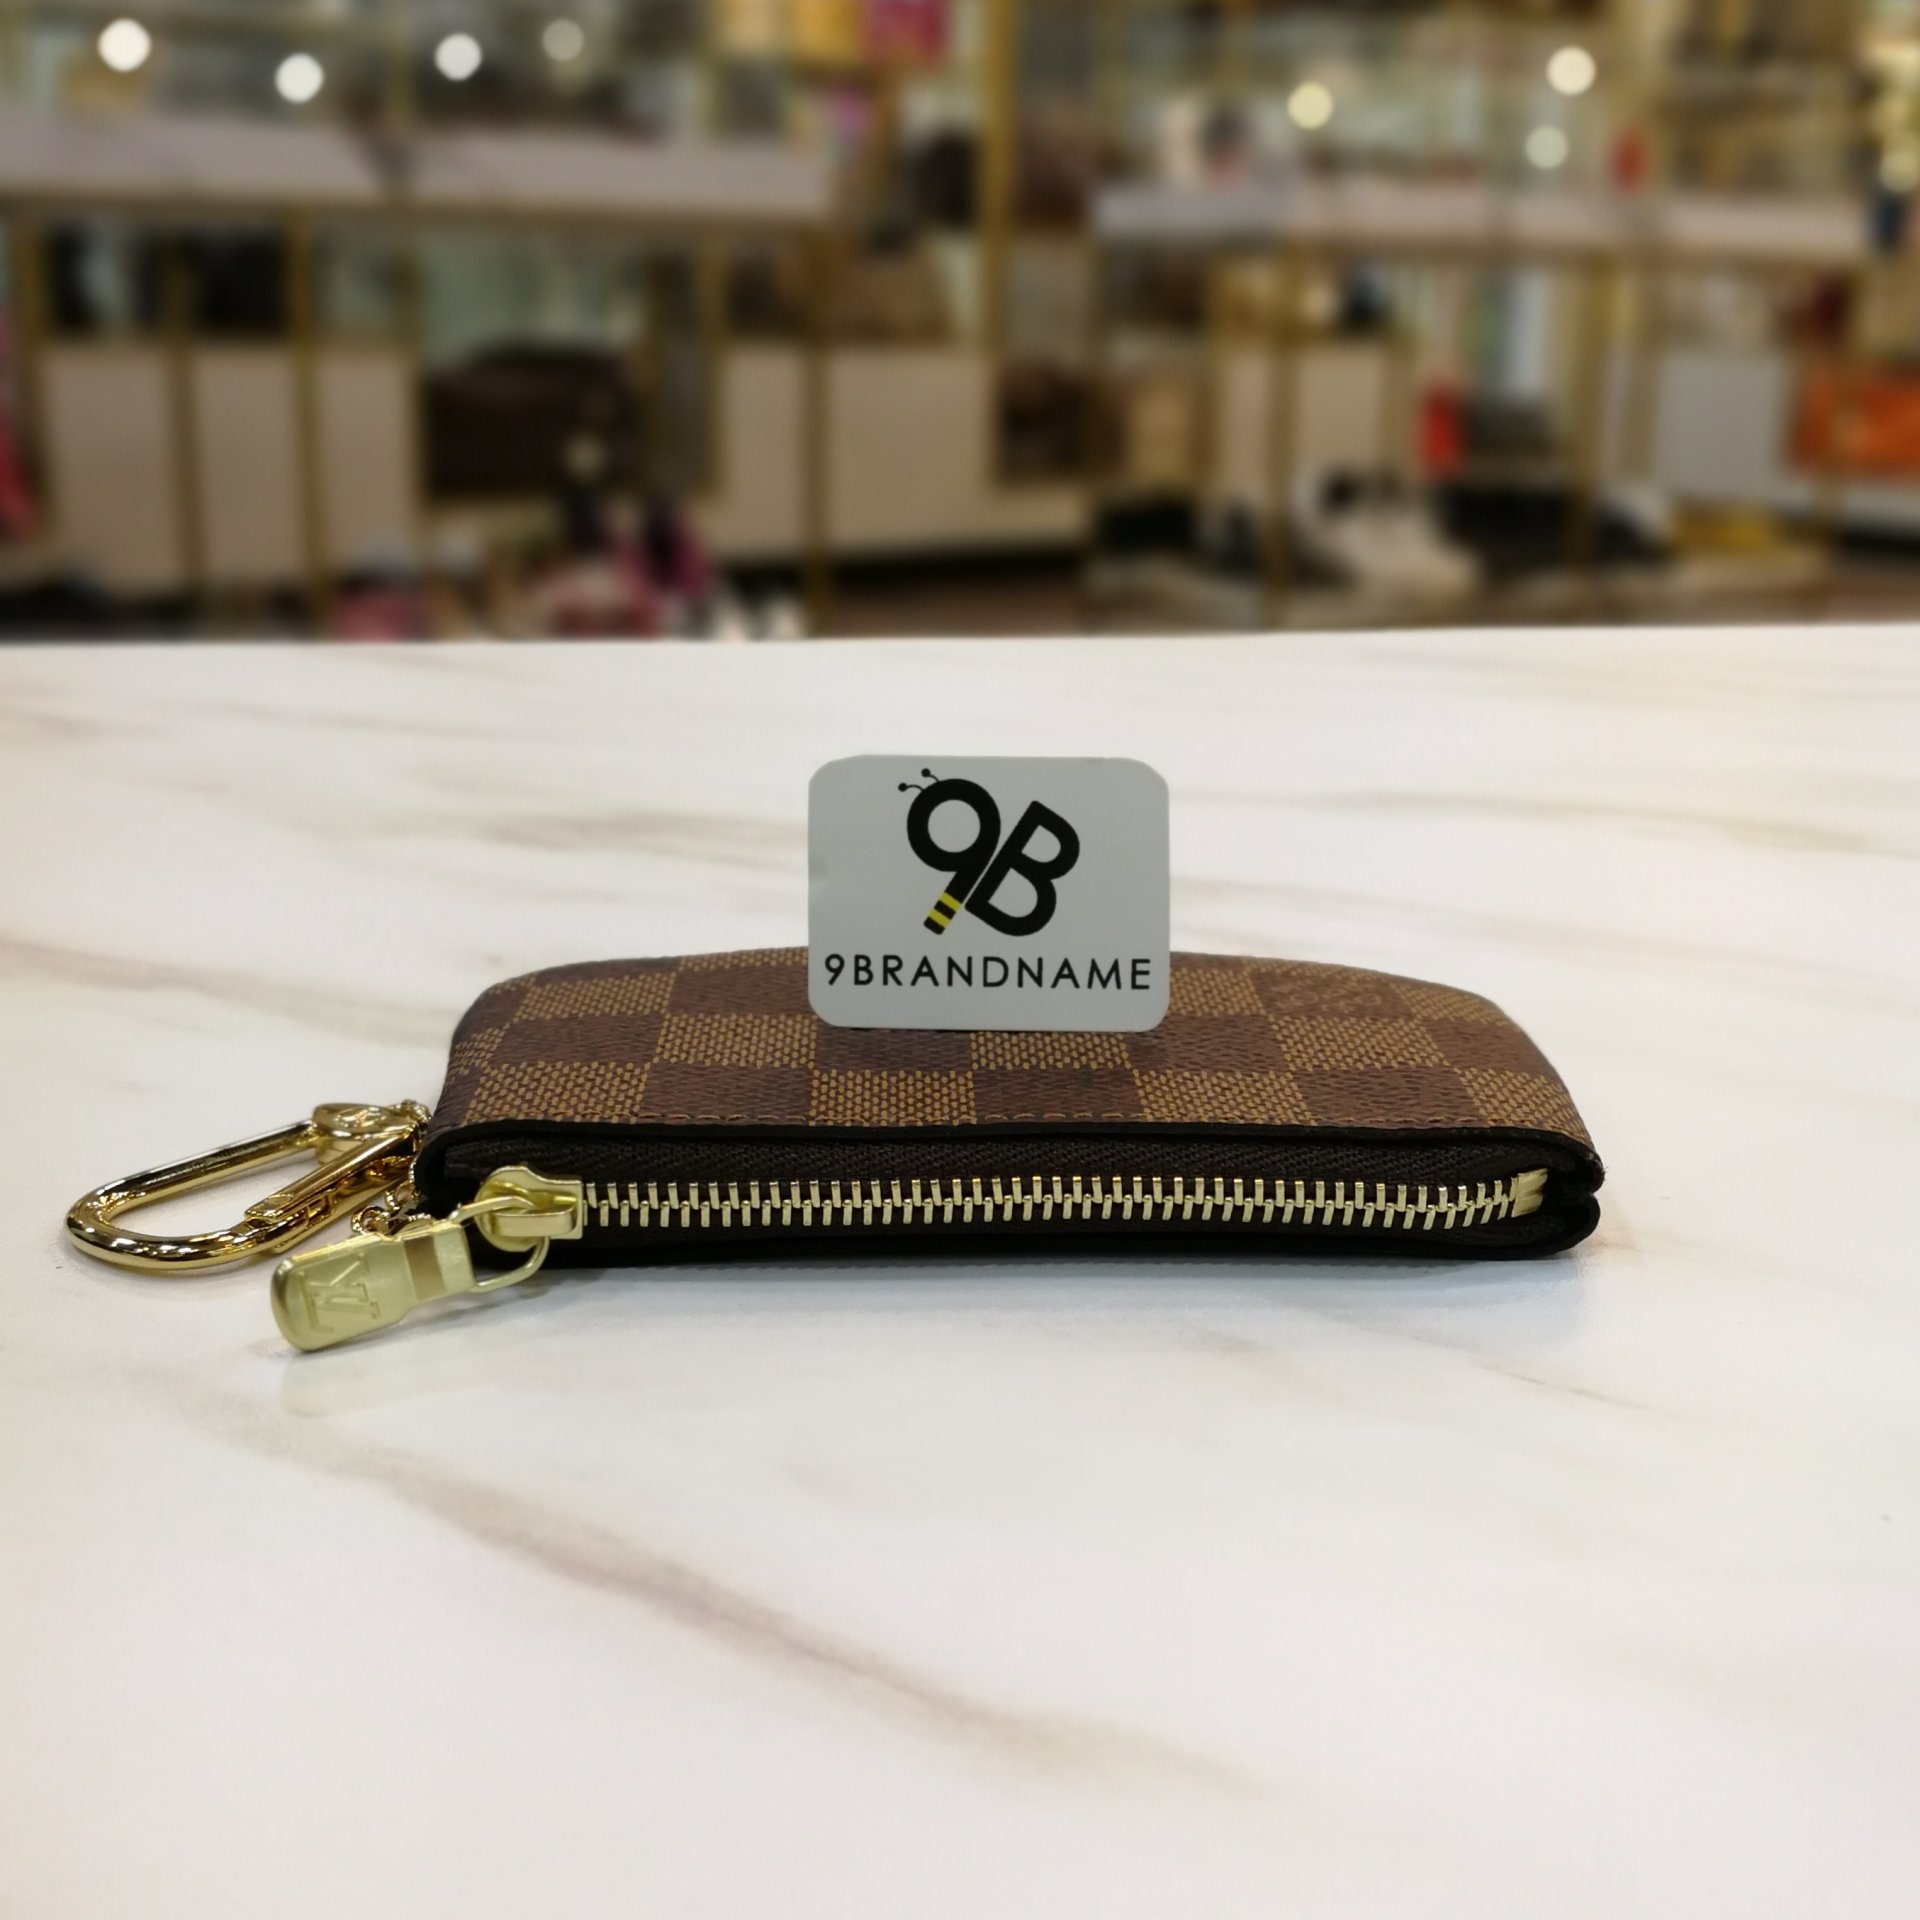 Key Pouch Monogram Canvas - Wallets and Small Leather Goods M62650